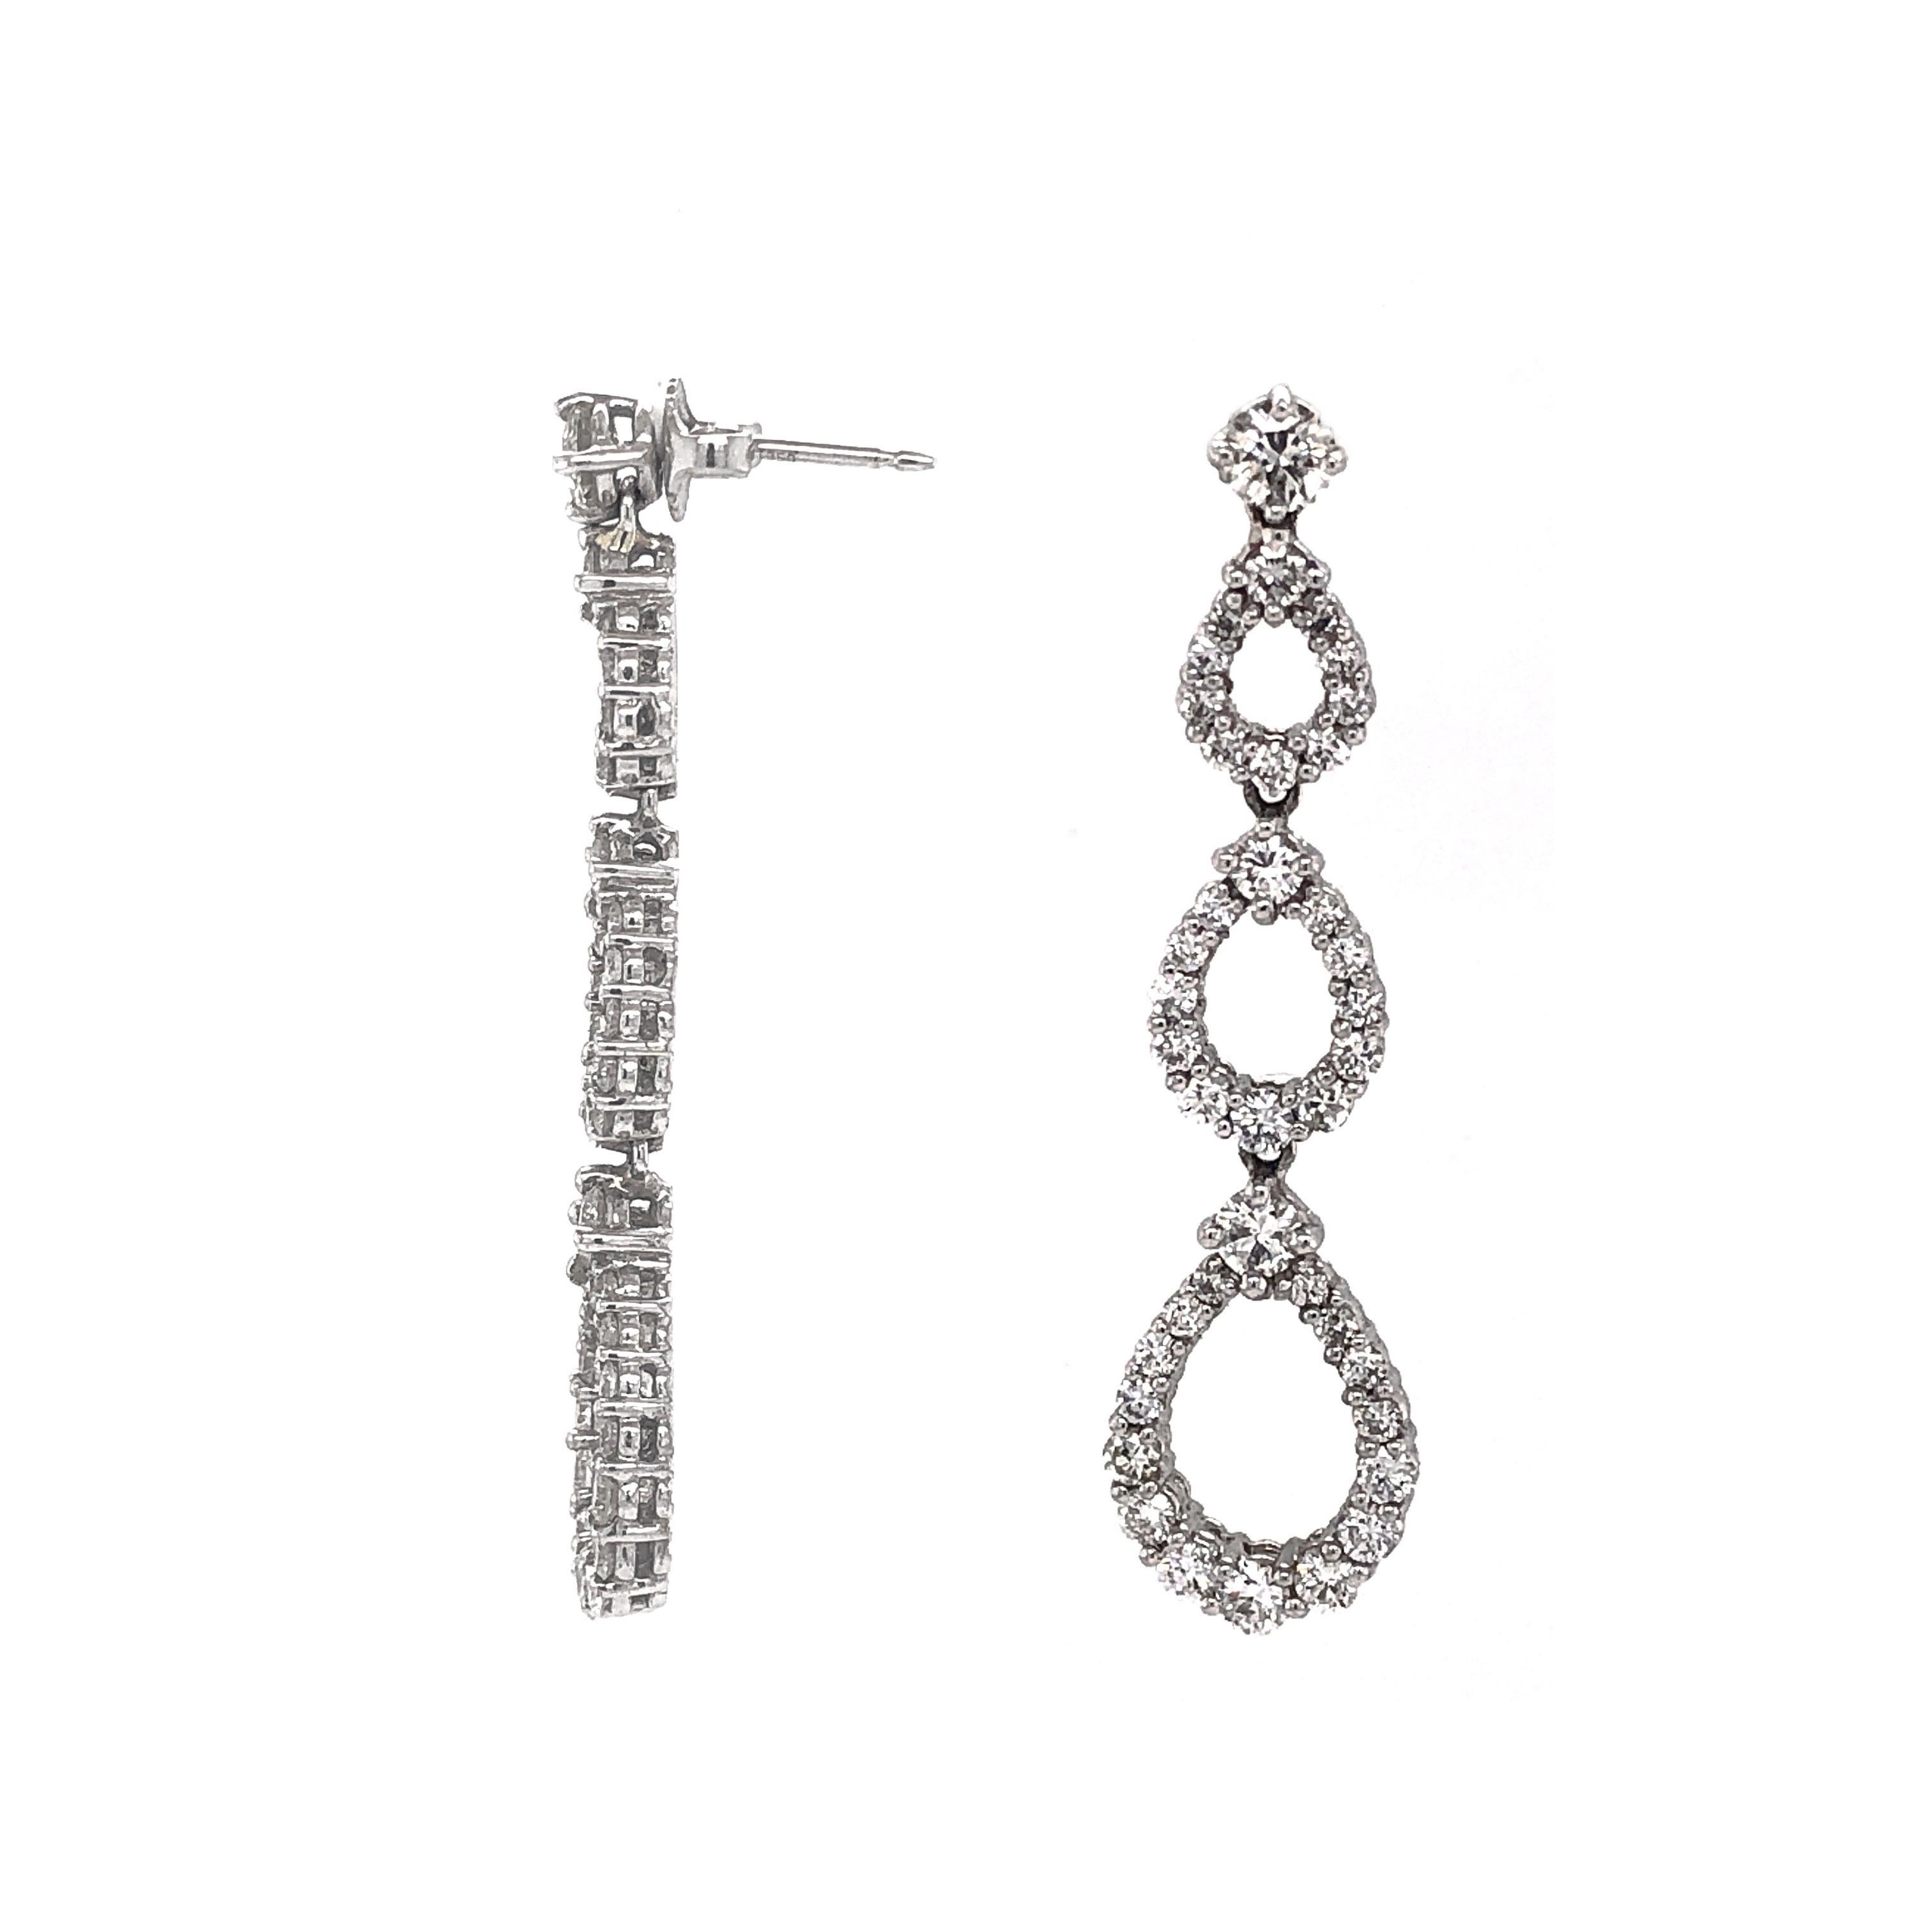 Beautiful classic design of pear shapes dangling platinum earrings adorned in white round diamonds 4.53 ct.   
Diamonds are white and natural in G-H Color Clarity VS.
Platinum 950 metal.
Butterfly studs.
Simple and modern design makes this a